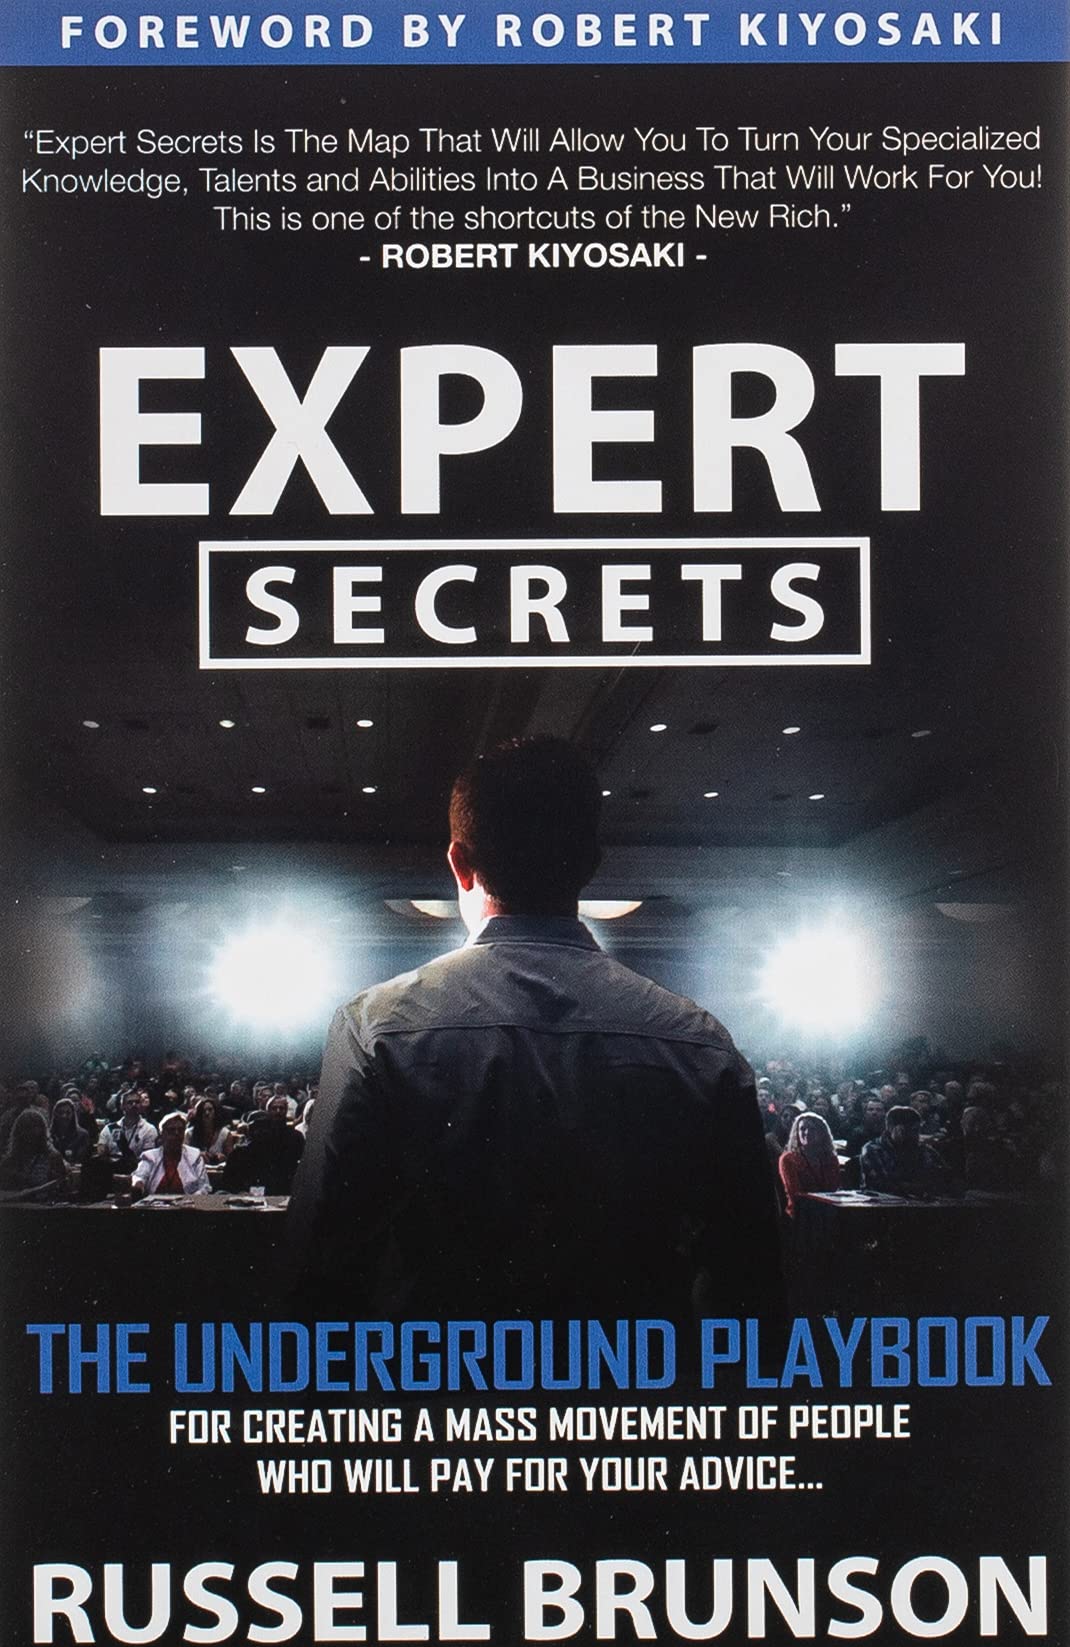 Expert Secrets: The Underground Playbook to Find Your Message, Build a Tribe, and Changing the World